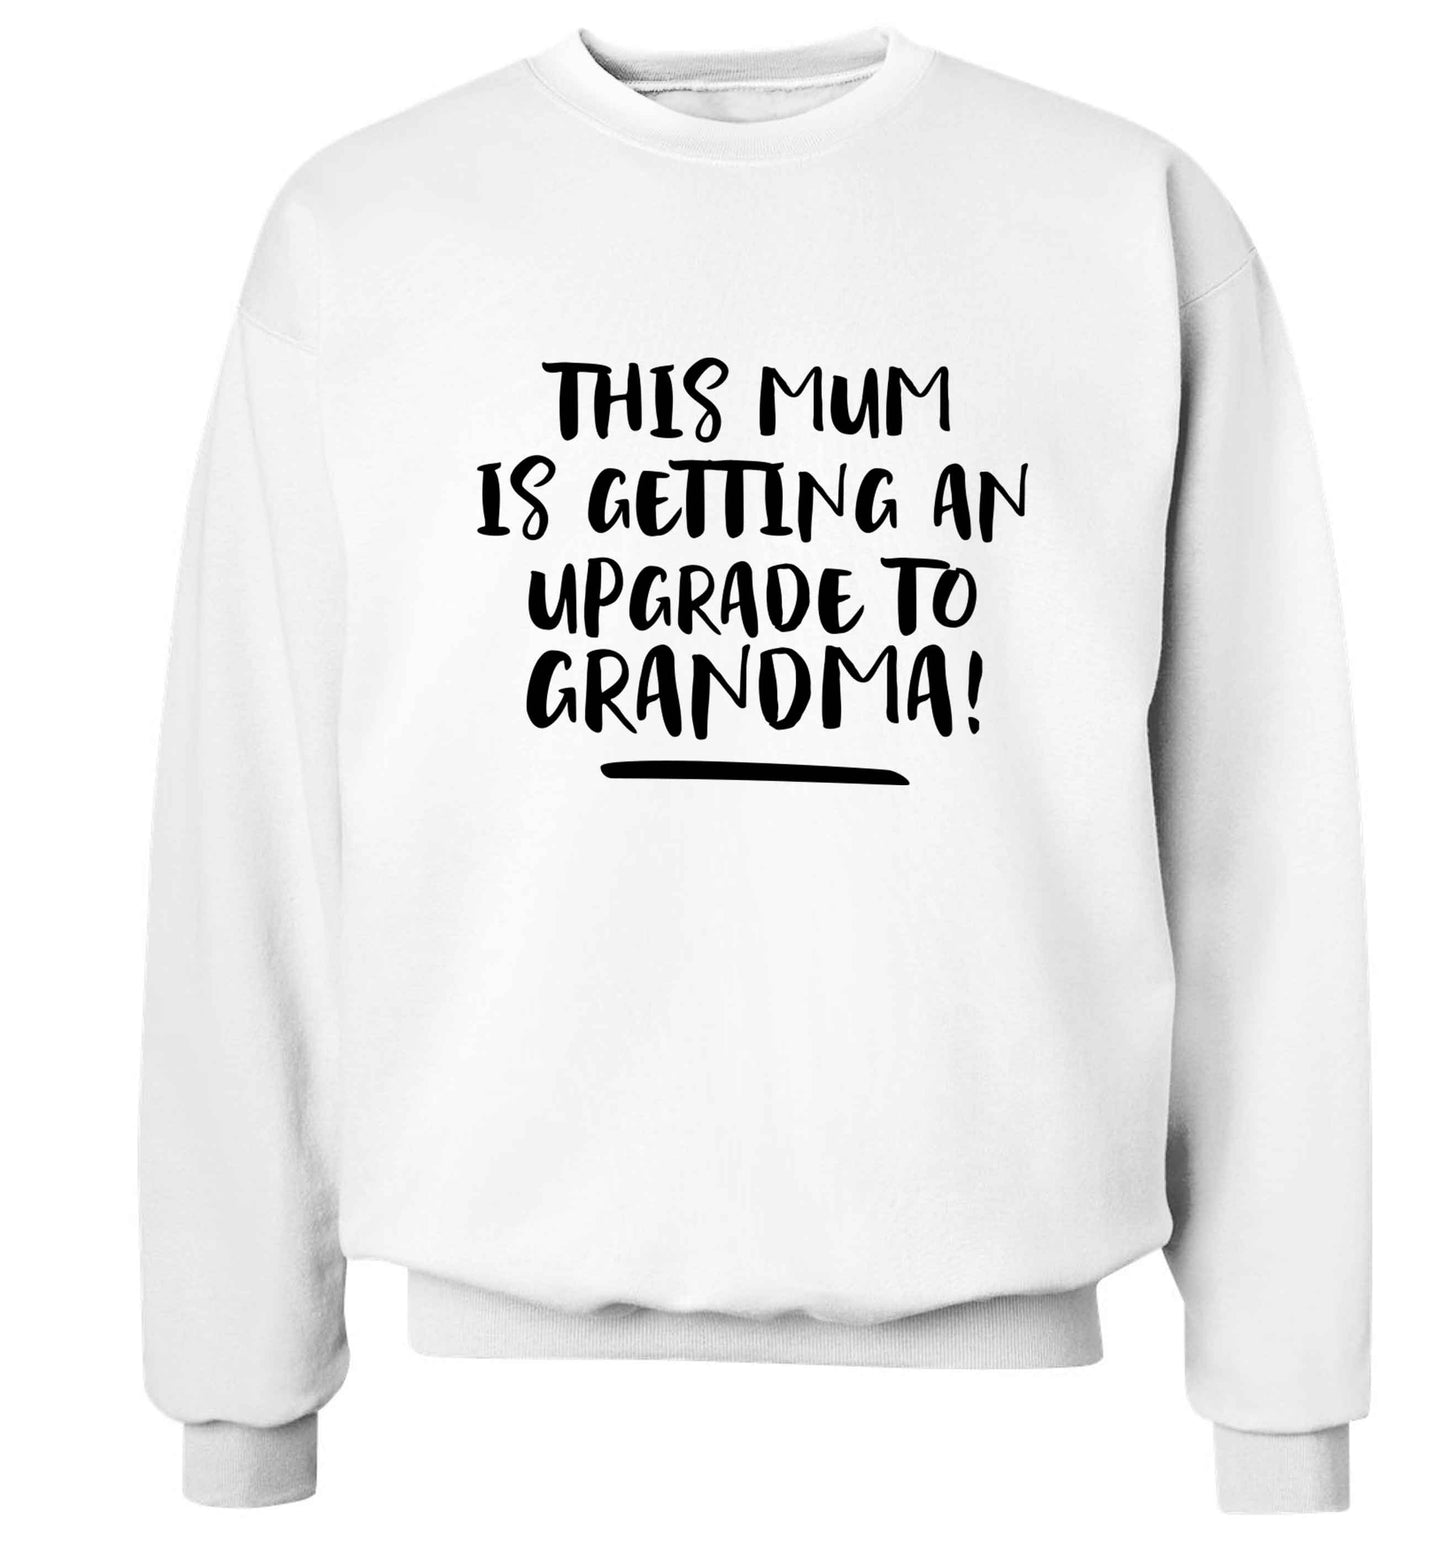 This mum is getting an upgrade to grandma! Adult's unisex white Sweater 2XL